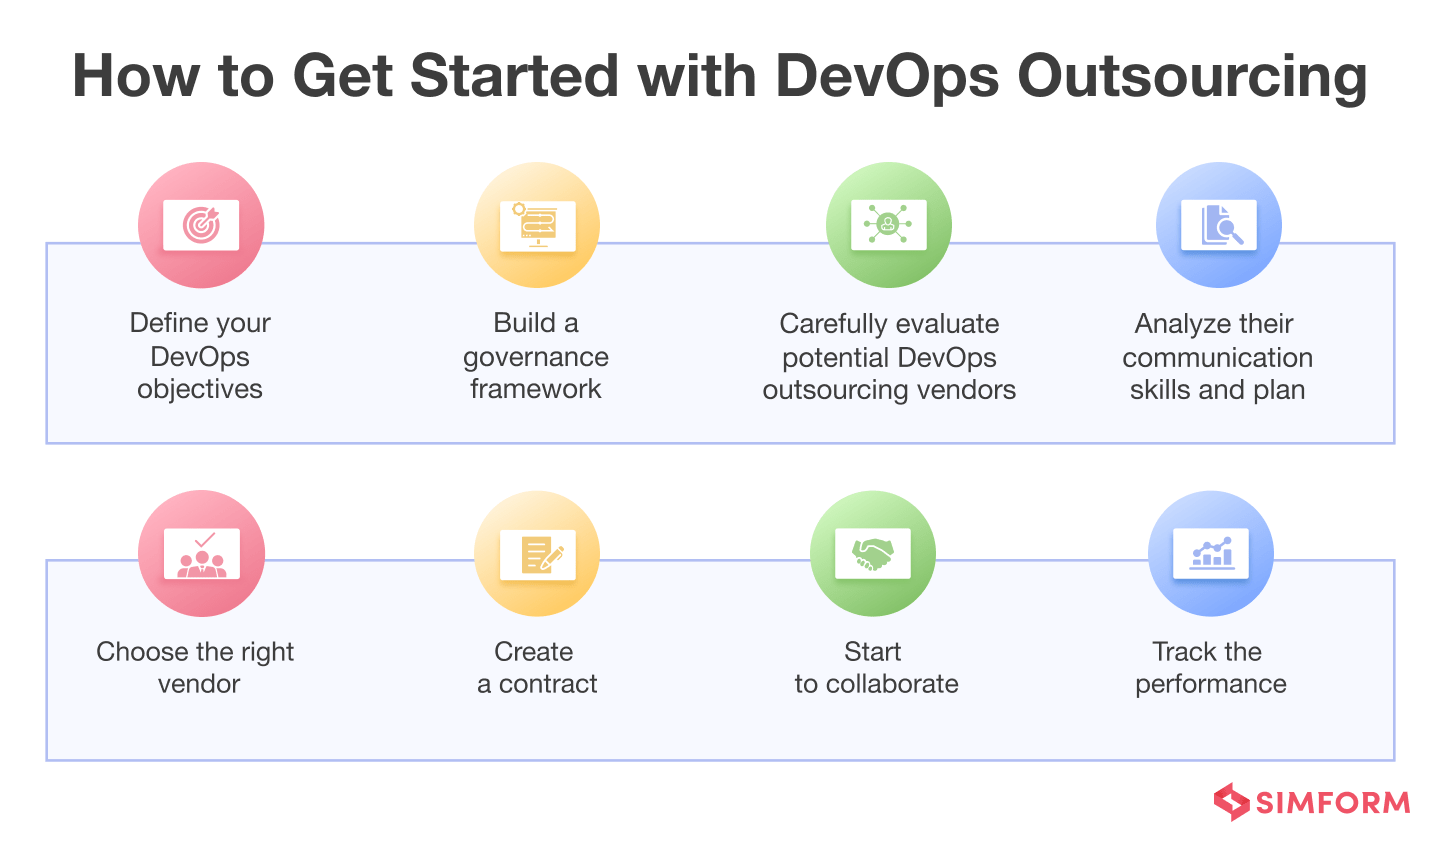 How to Get Started with DevOps Outsourcing